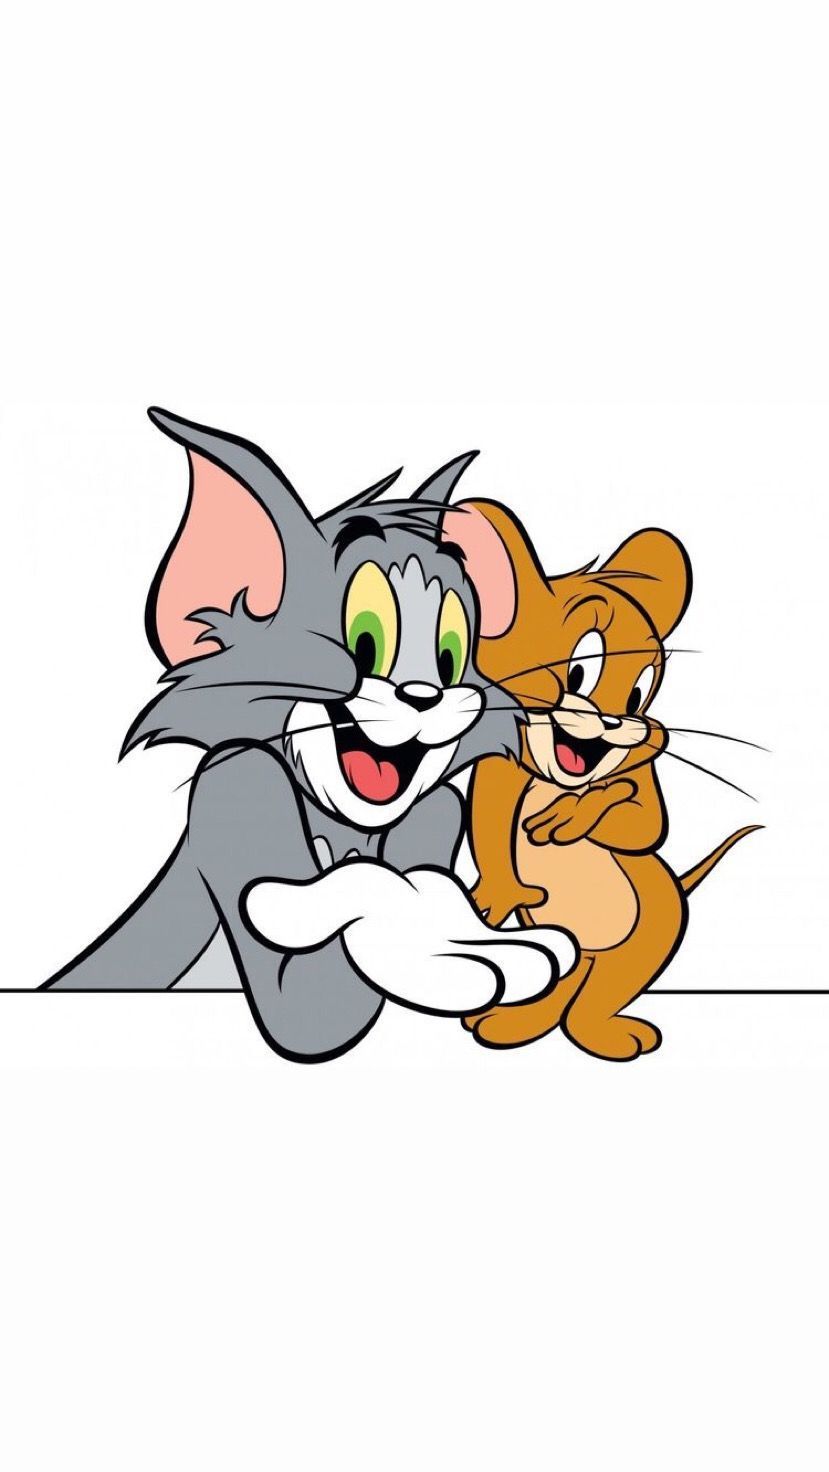 Cute tom and jerry photo image Wallpapers Download  MobCup